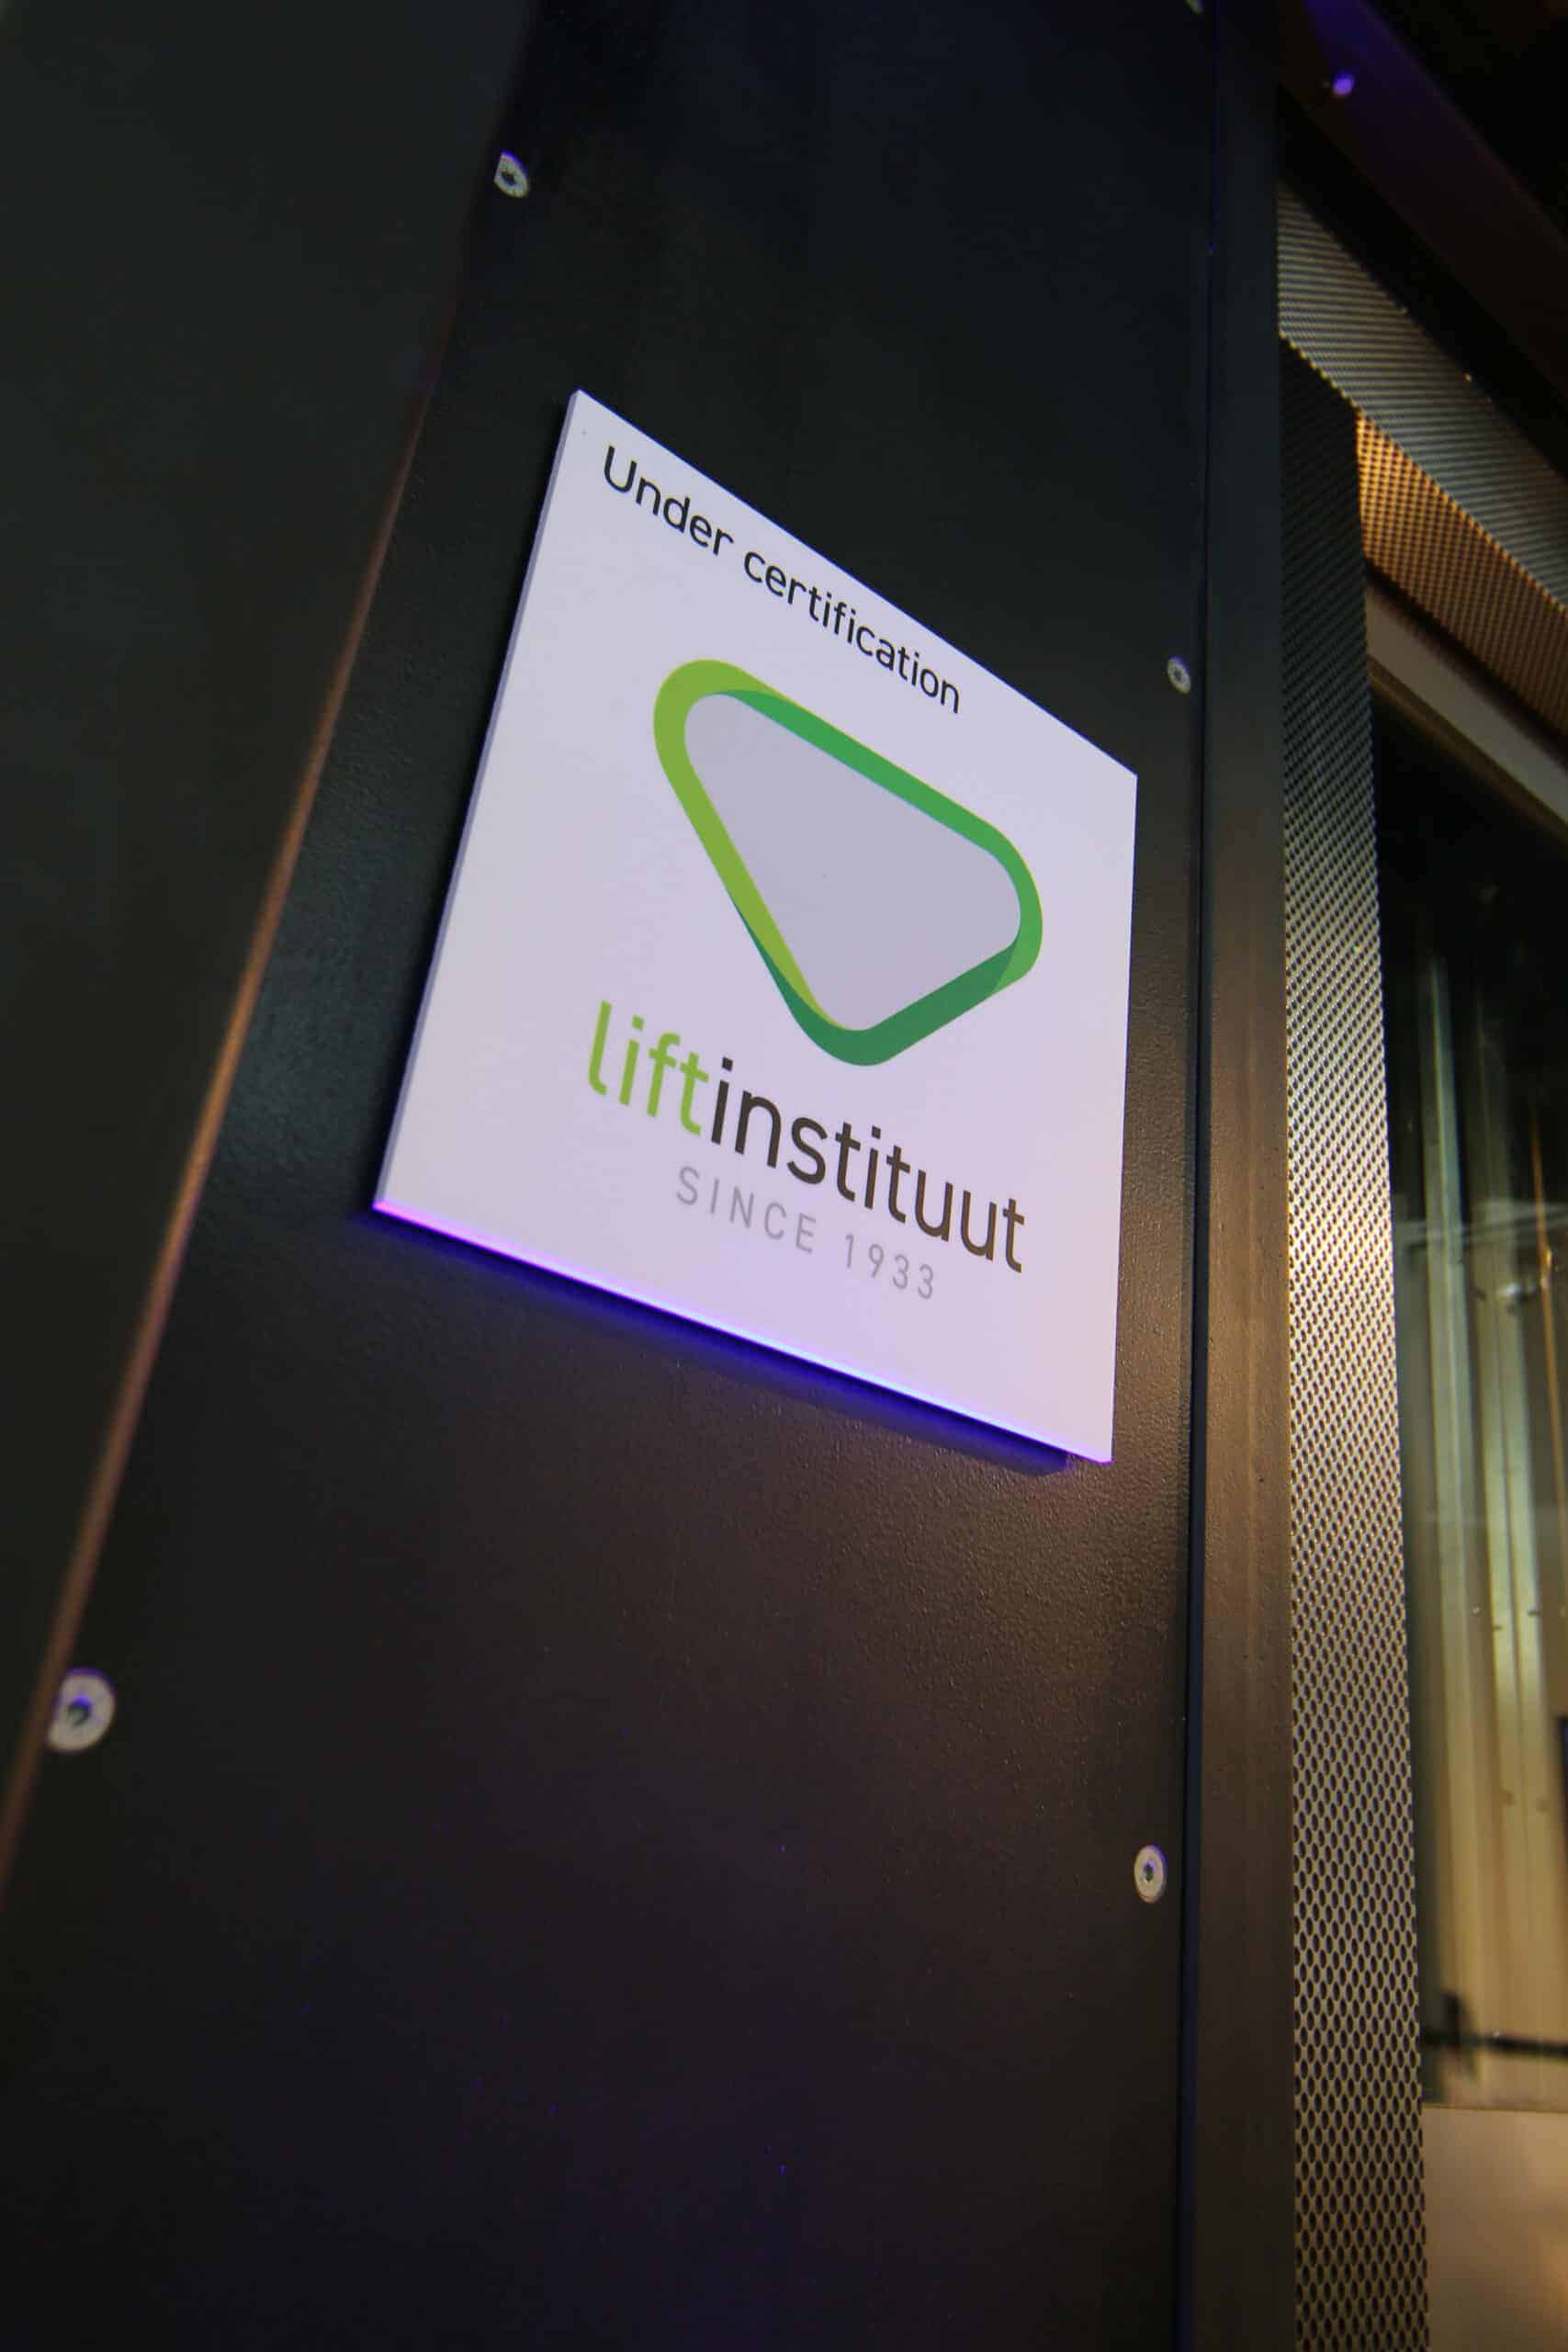 The newest addition to the SERAPID Product Line, the DLDS (Dual Lift Drive System) has now received certification from Liftinstituut BV!